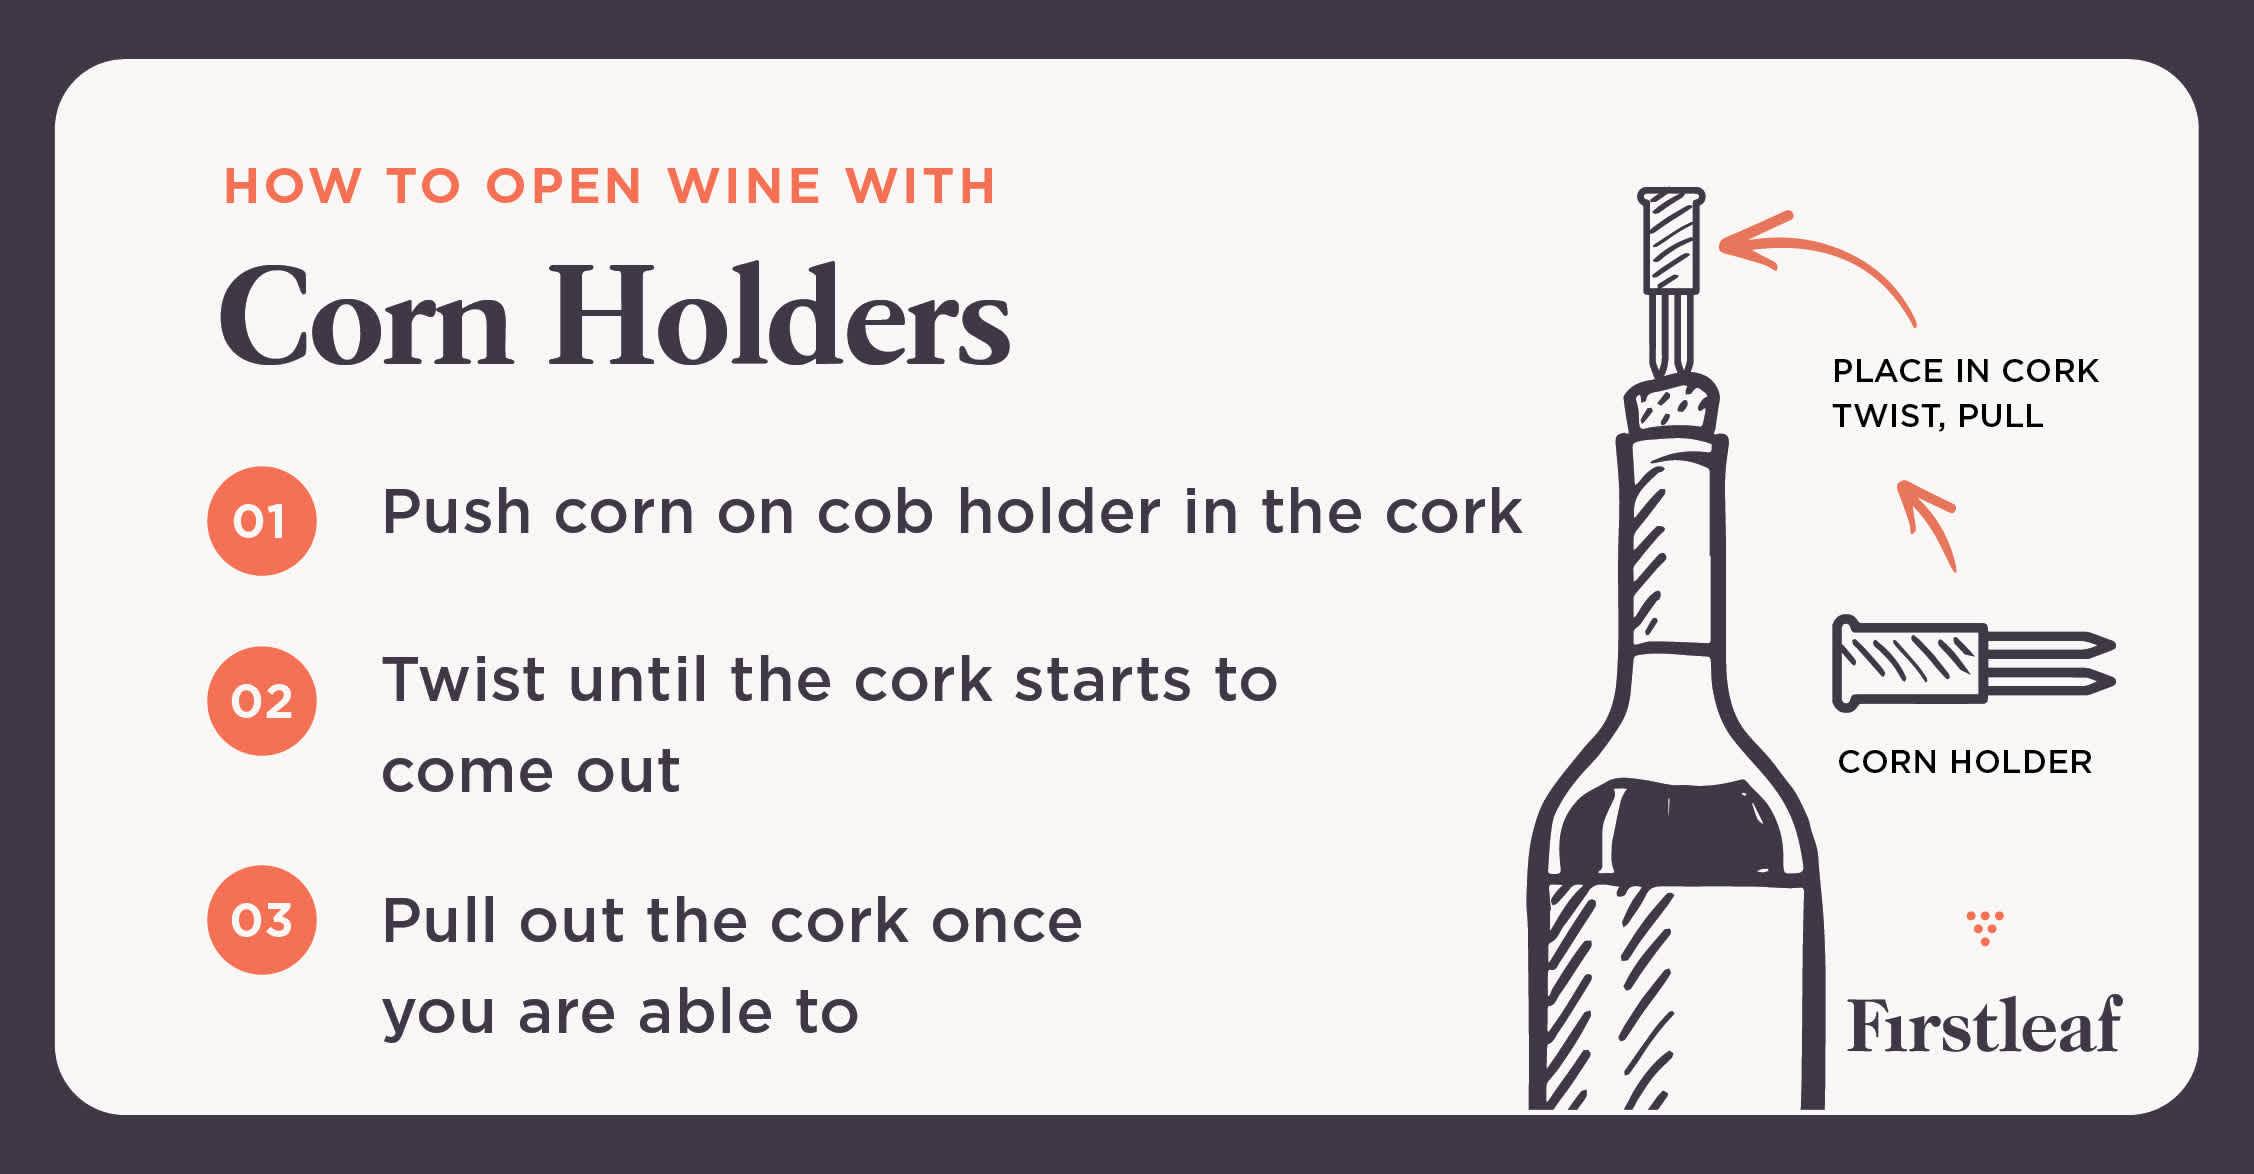 How to Open Wine with Corn Holders